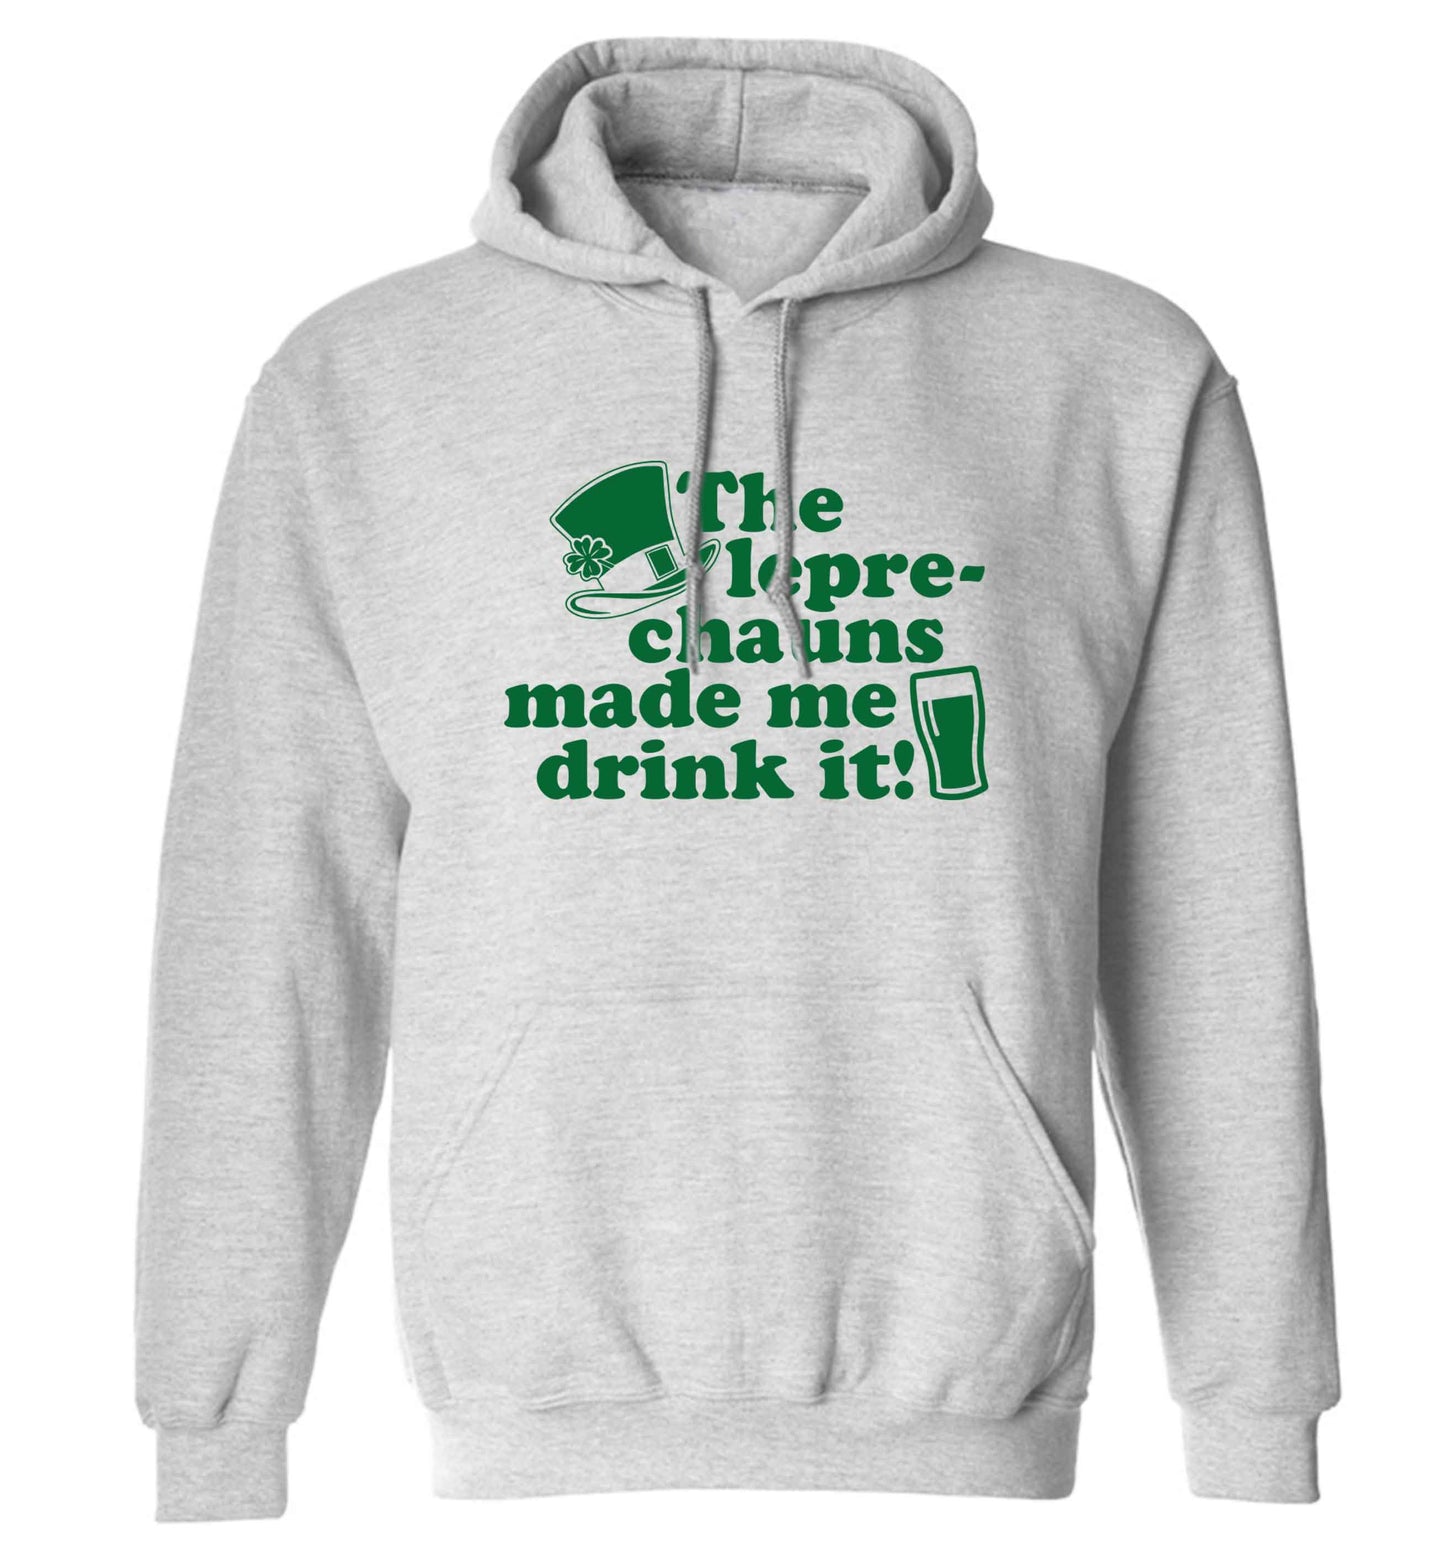 The leprechauns made me drink it adults unisex grey hoodie 2XL